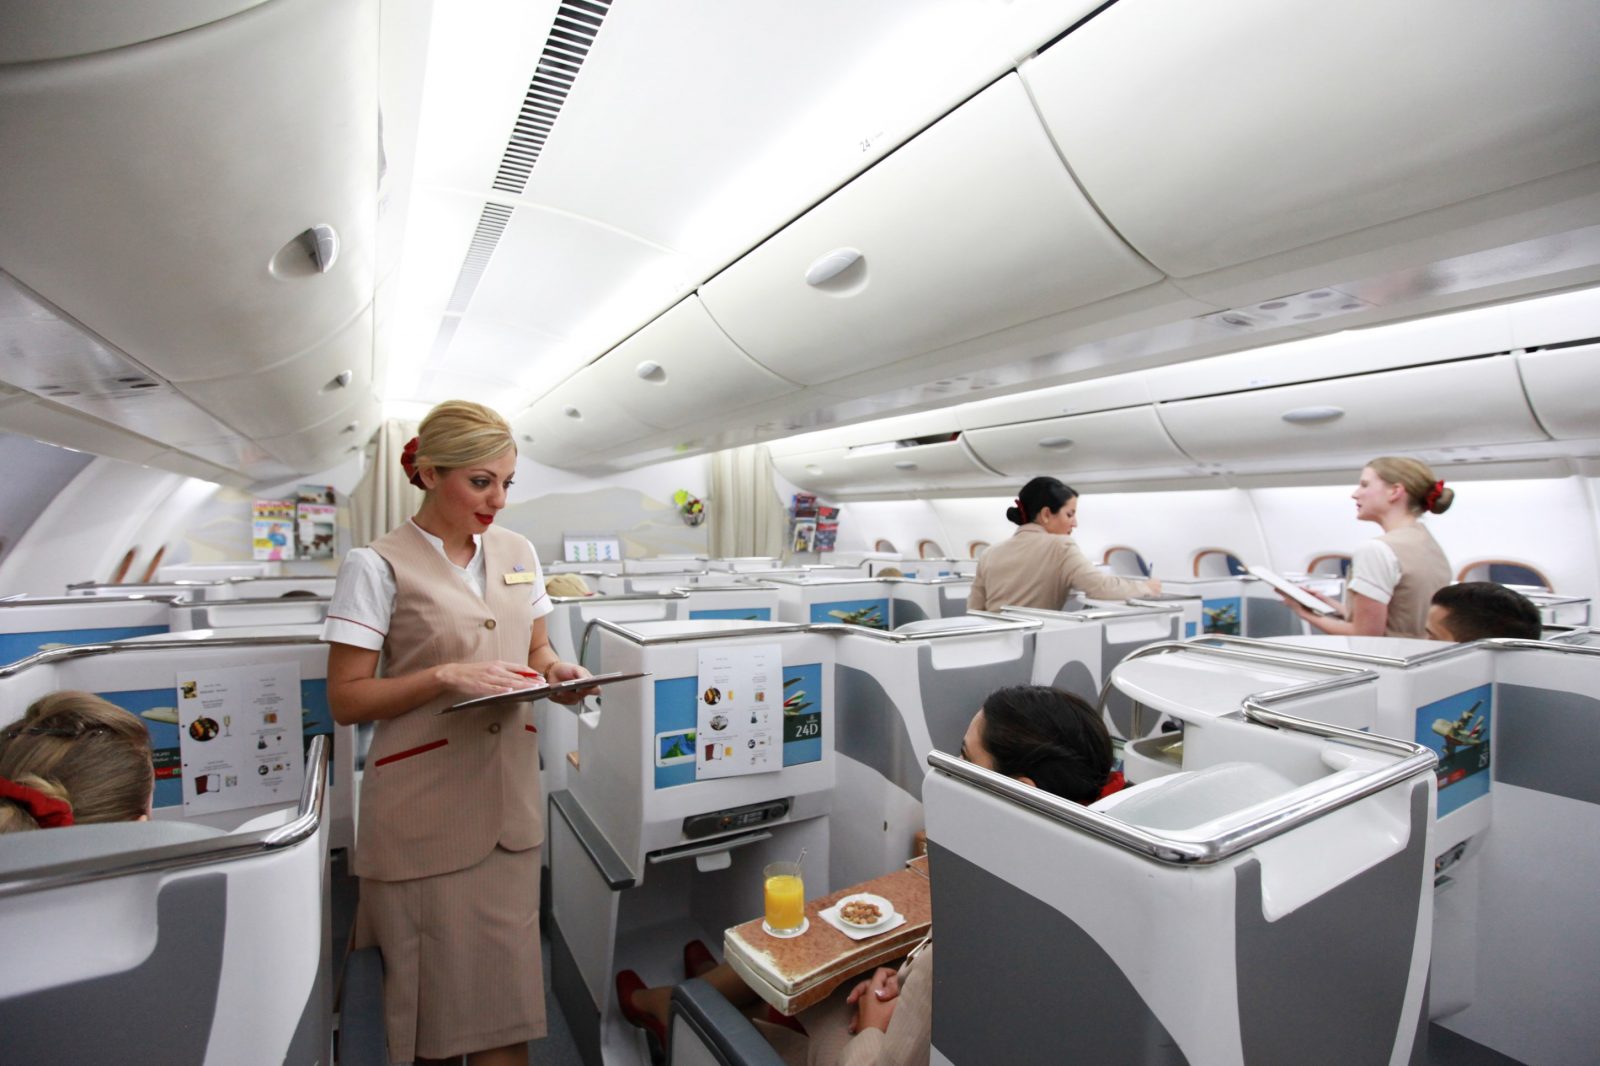 Emirates Gets Through its Third Vice President of Cabin Crew in Just a Couple of Years